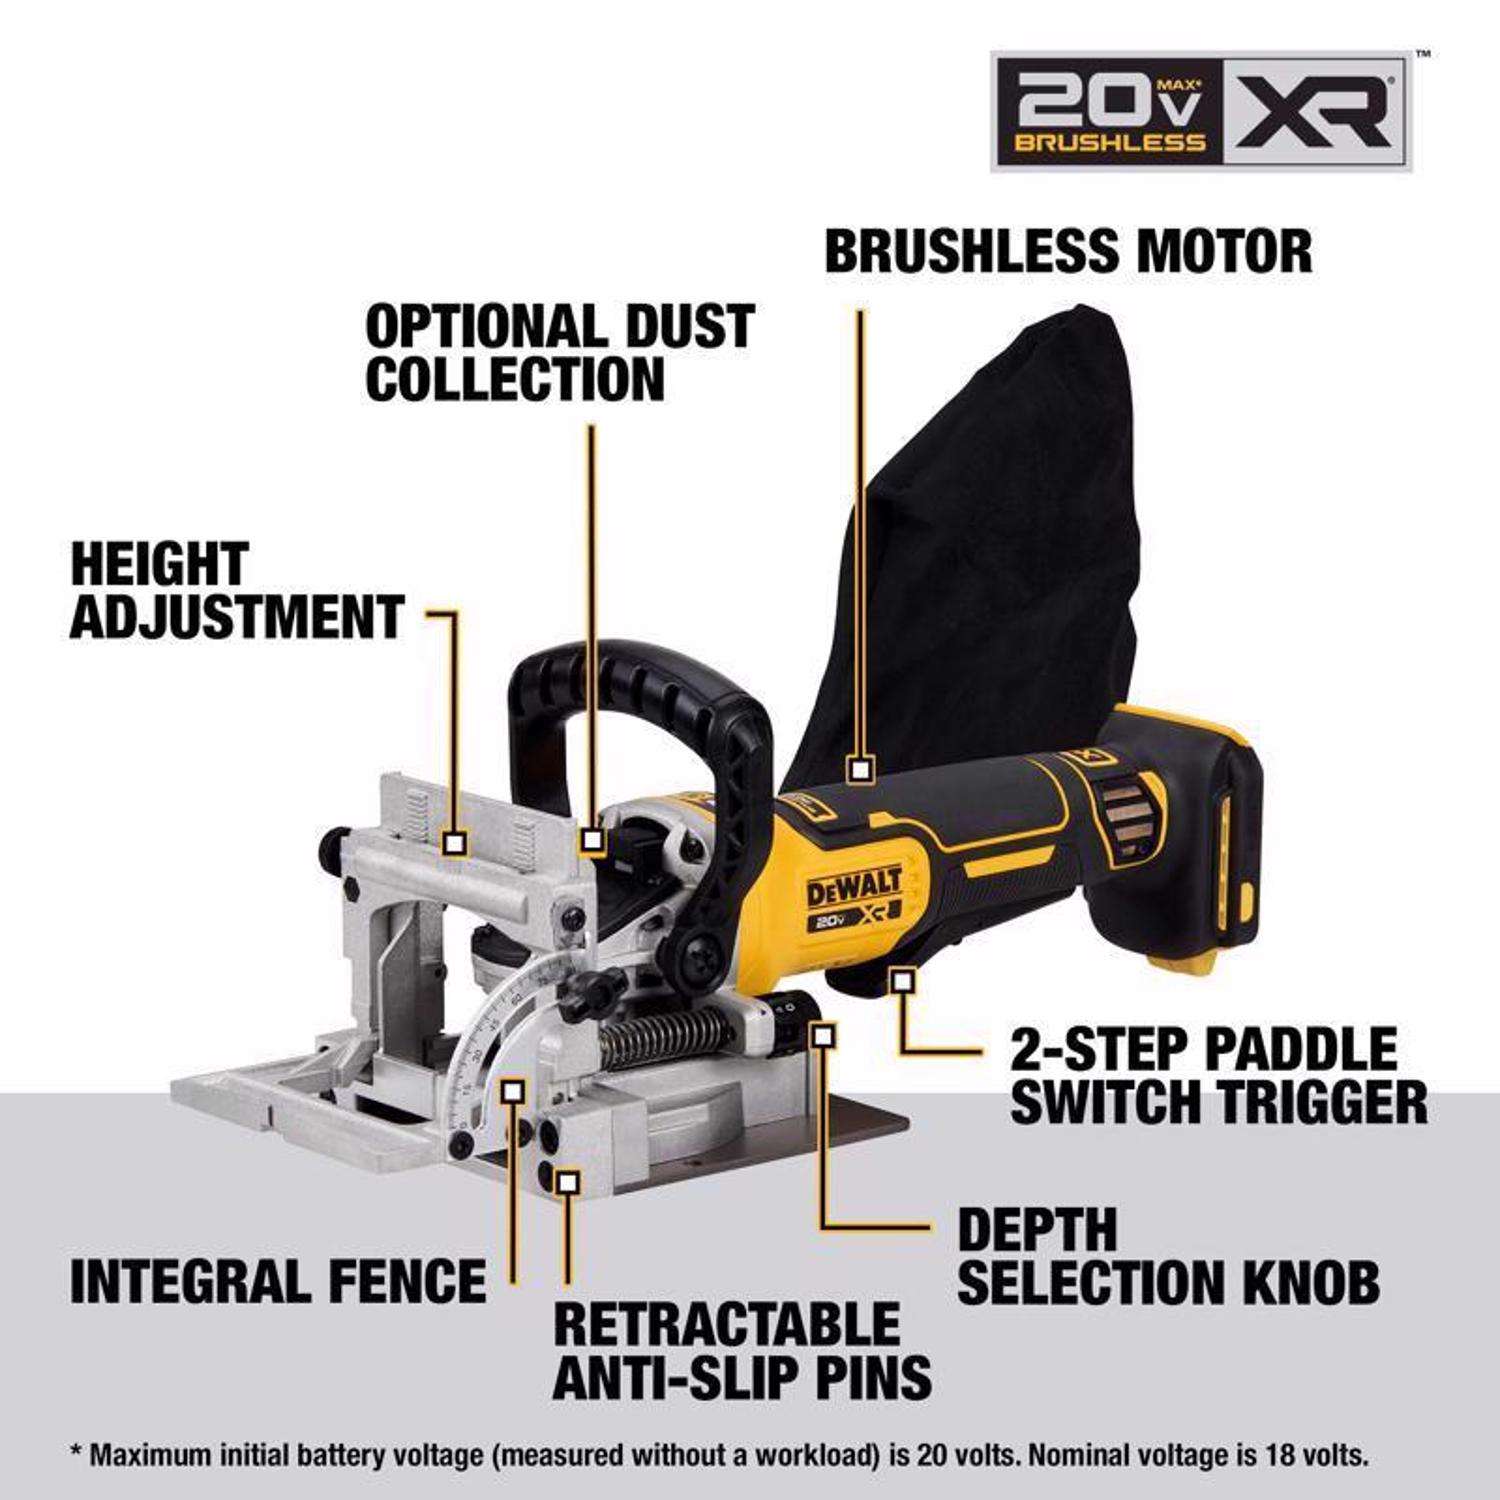 DeWalt DCW682B 20V Max XR Brushless Cordless Biscuit Joiner, Tool Only